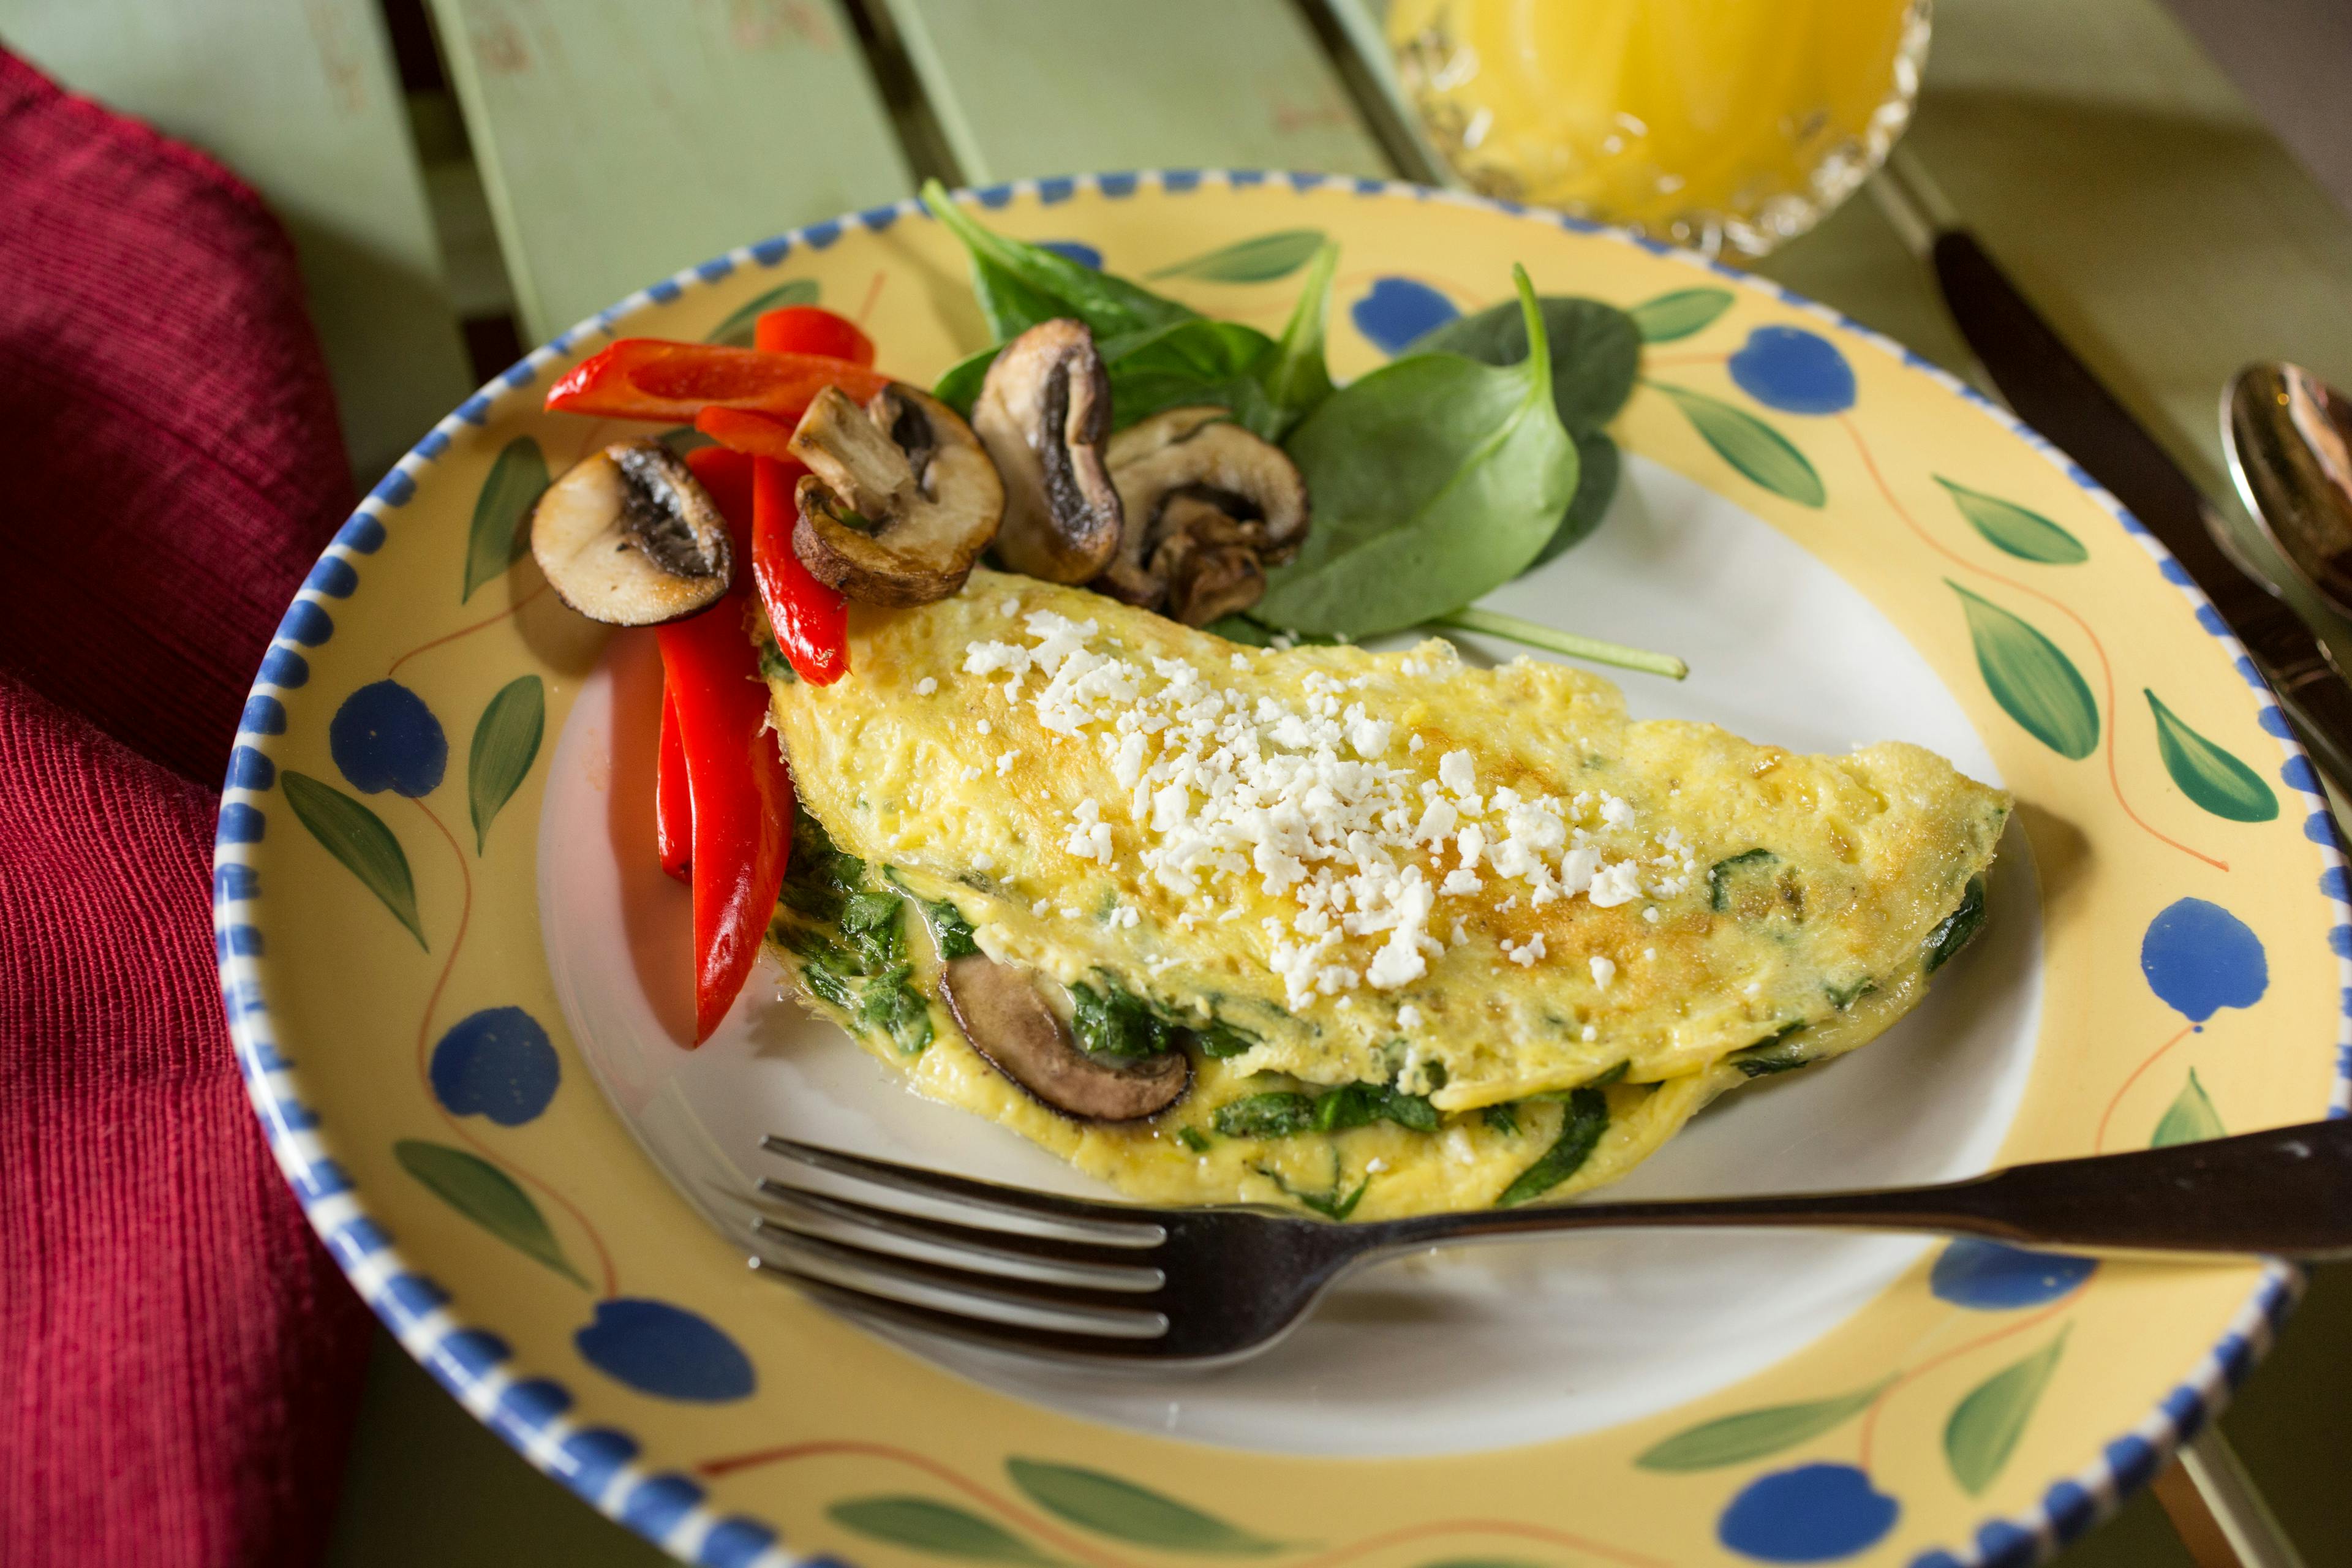 An omelet with sauteed spinach and mushrooms with a side of fresh vegetables on a white plate with a colorful rim